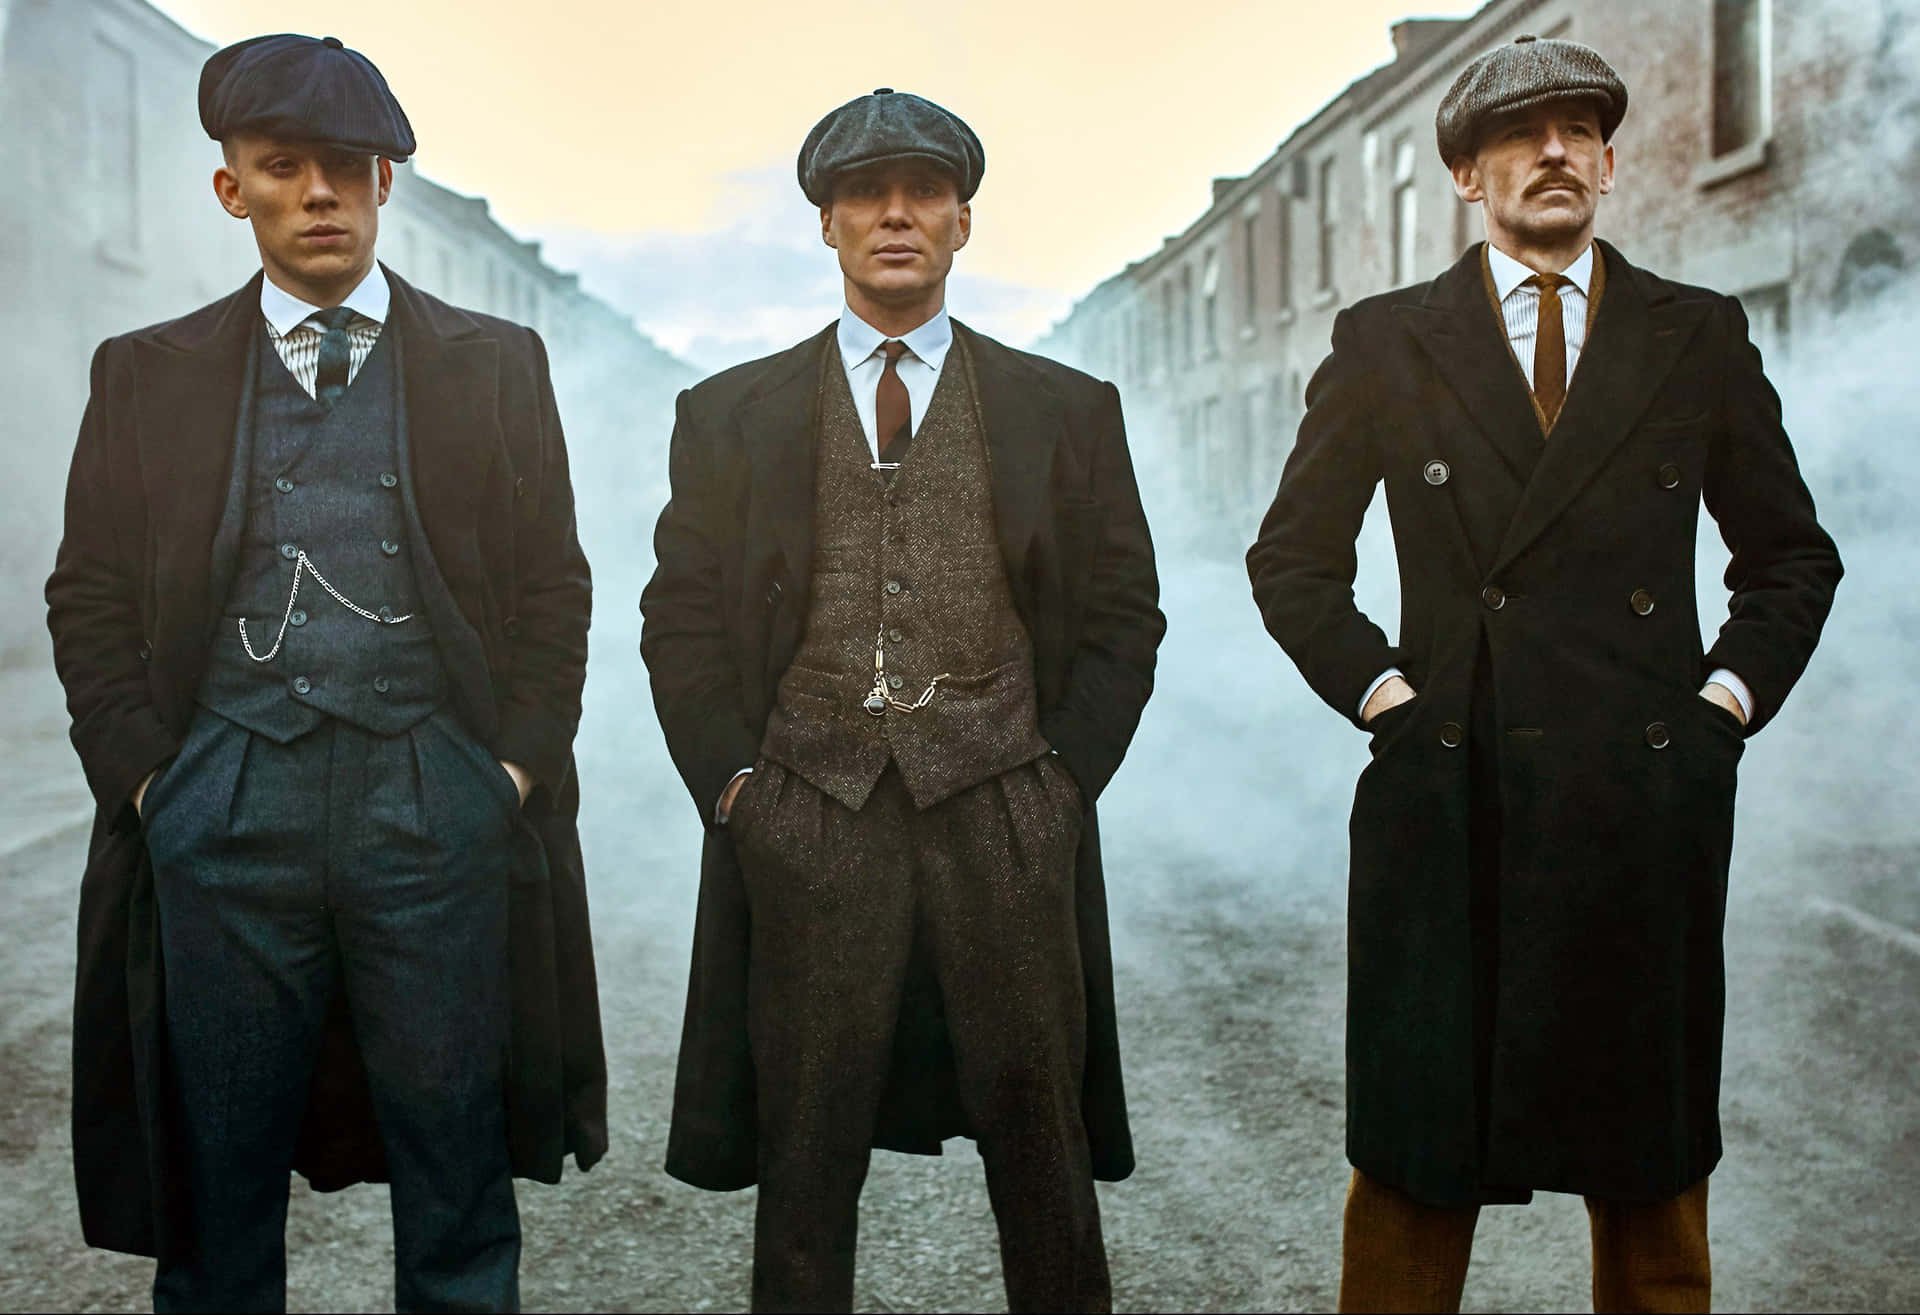 “Headstrong, fierce, and ruthless: The Peaky Blinders”